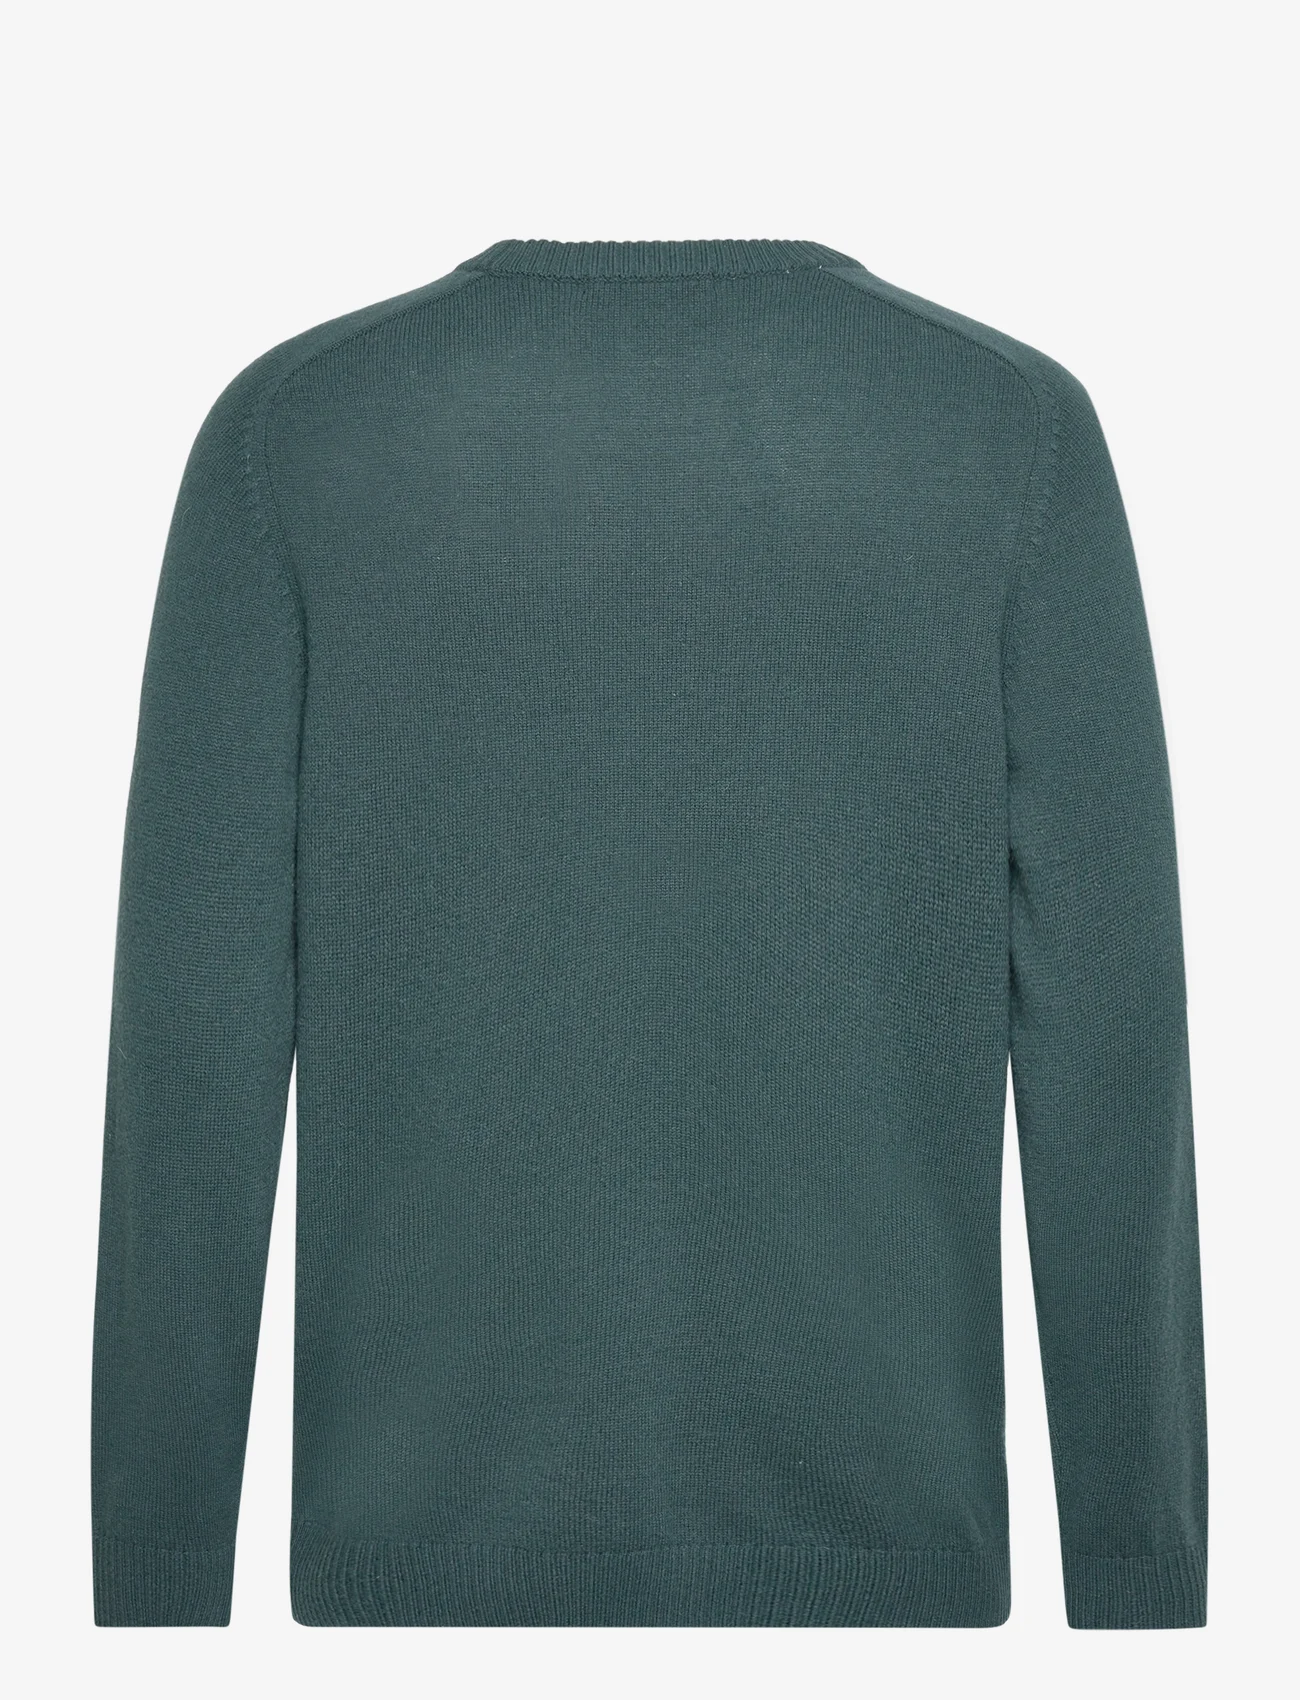 Selected Homme - SLHNEWCOBAN LAMBS WOOL CREW NECK W NOOS - basisstrikkeplagg - green gables - 1